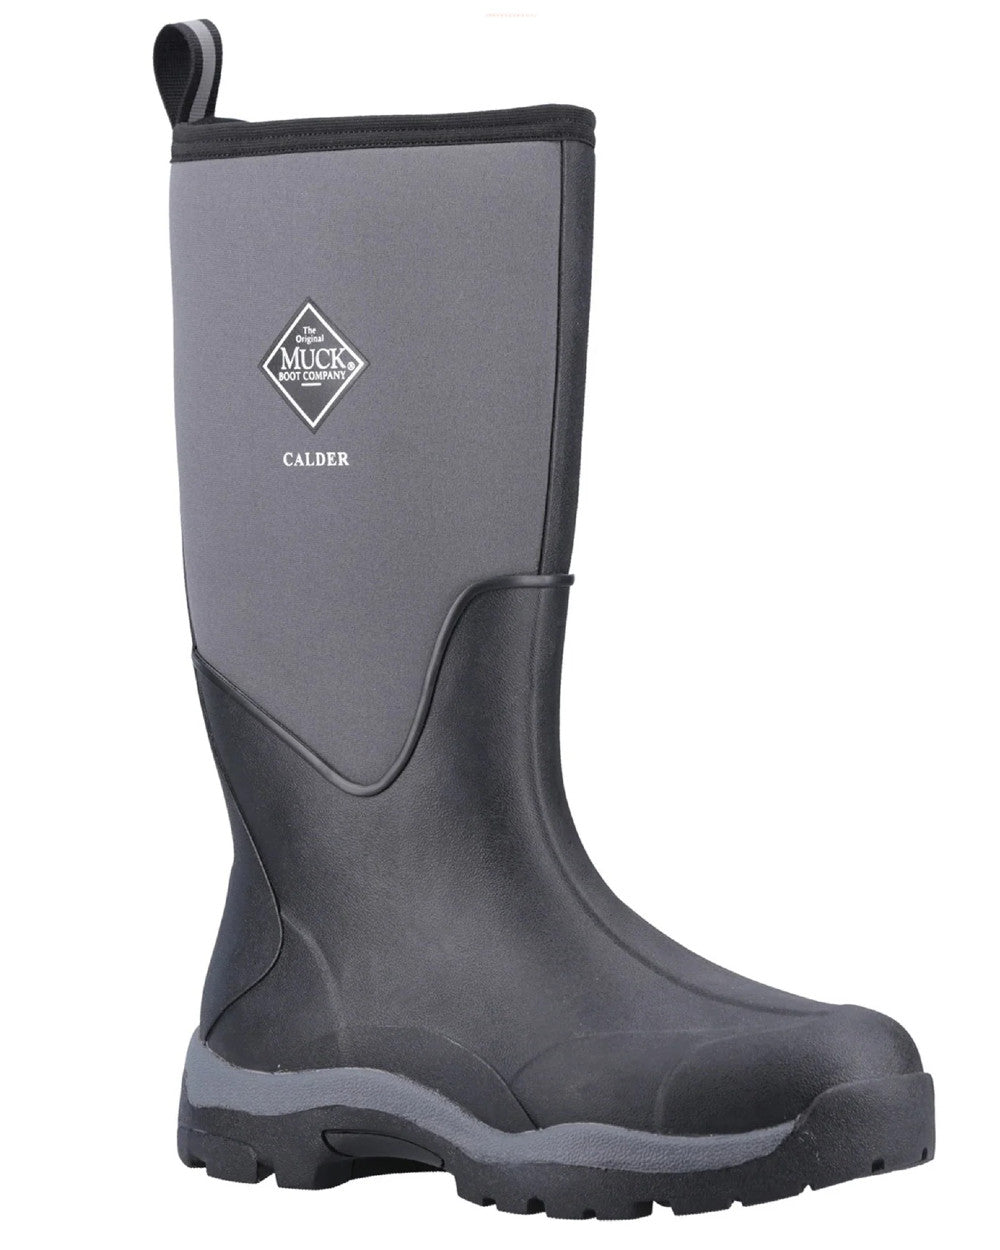 Black Coloured Muck Boots Unisex Calder Short Boots On A White Background 